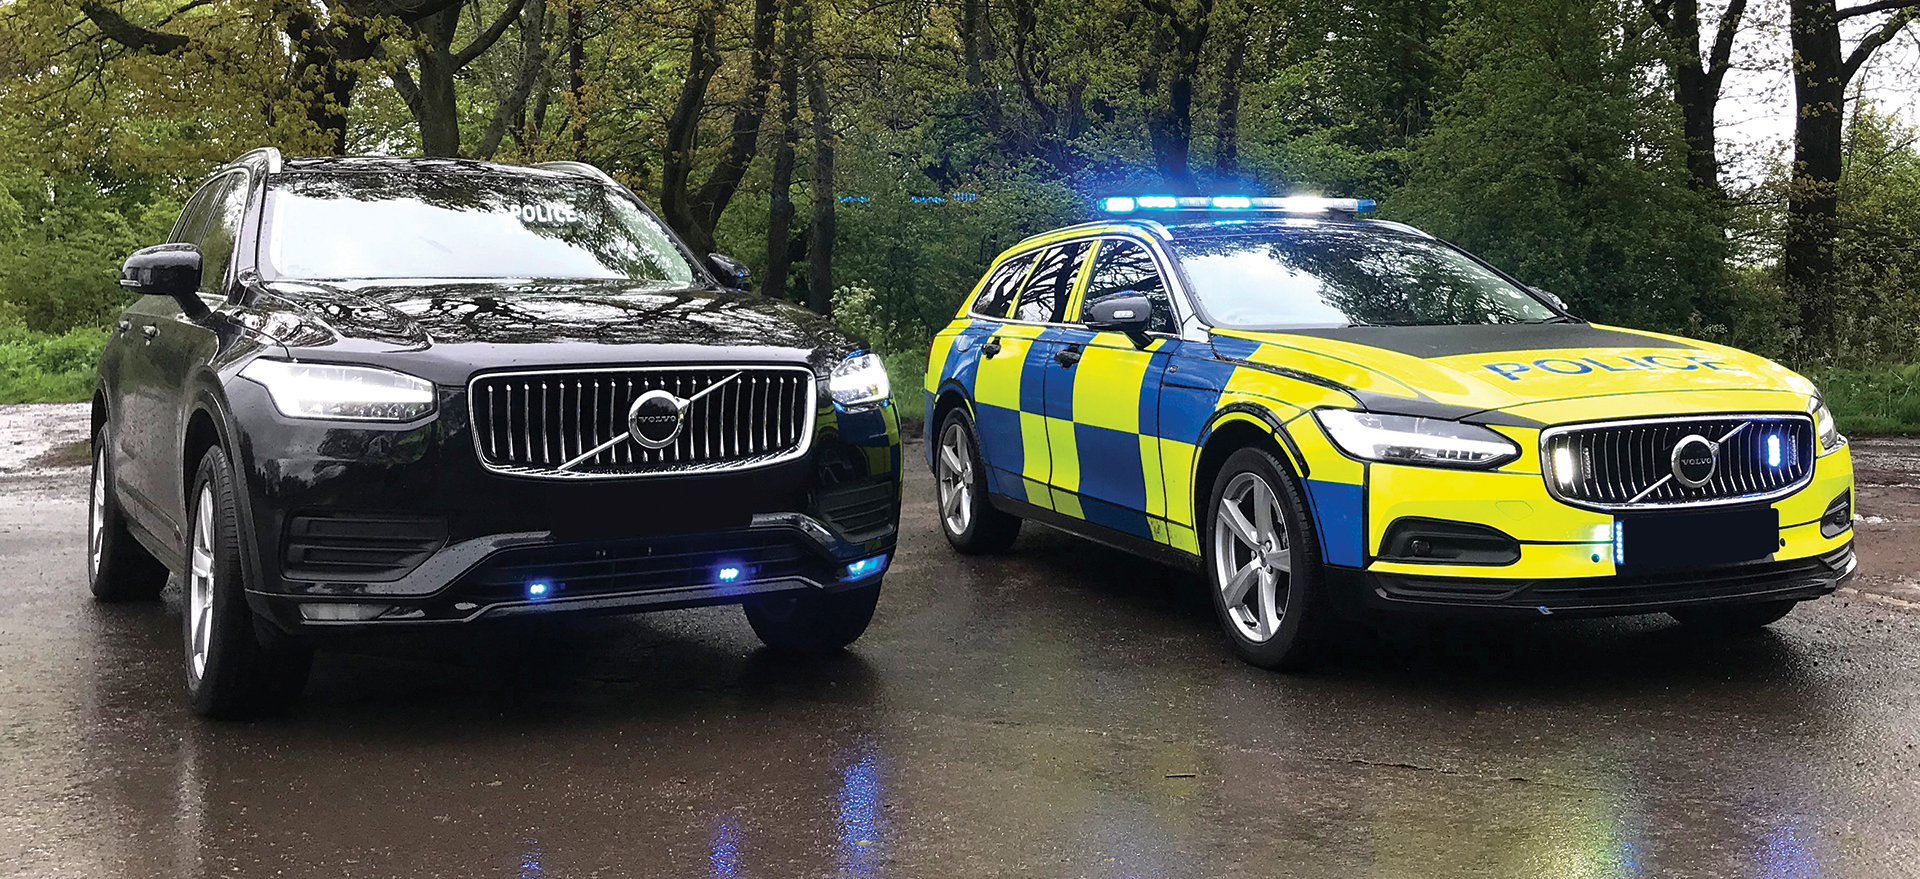 Black unmarked Volvo parked next to marked Police Volvo with livery, both at an angle, against wooded background, emergency lights reflecting off wet tarmac floor